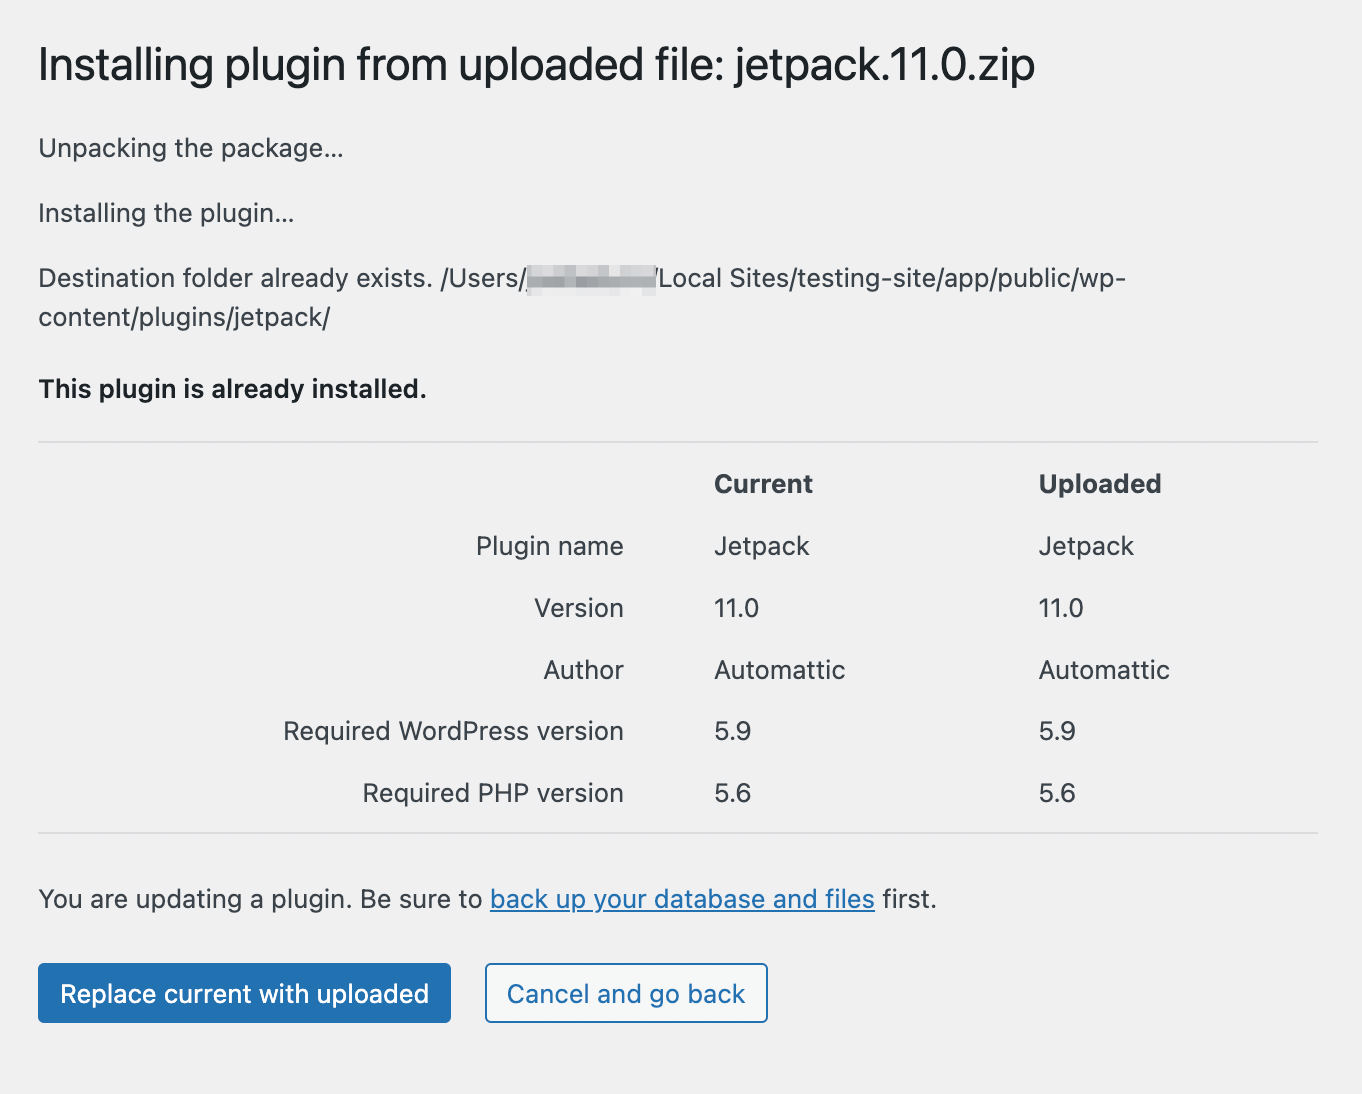 This plugin is already installed warning